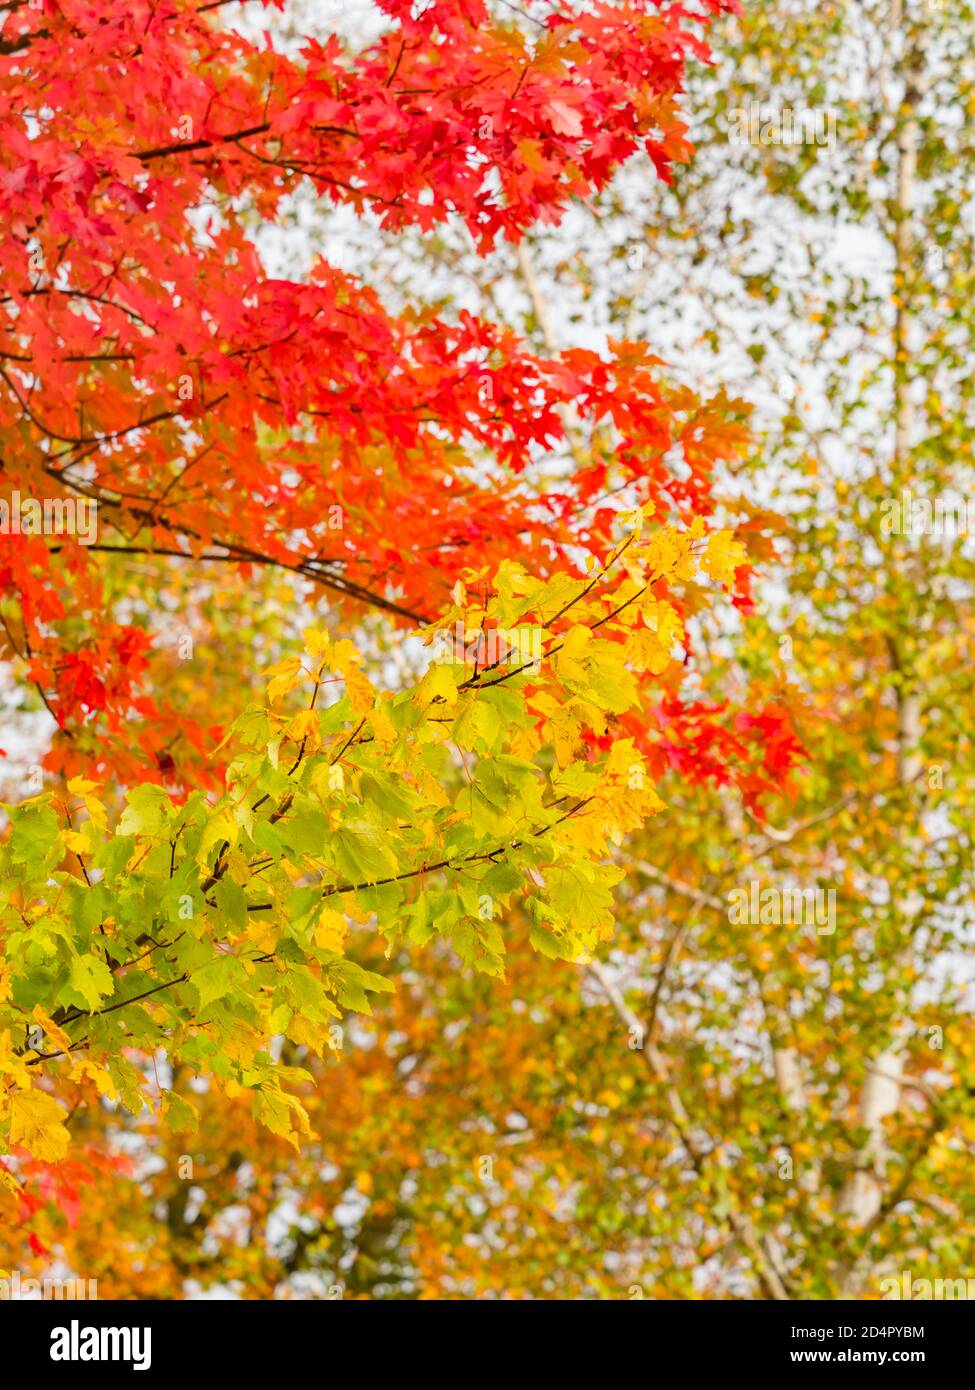 Intensive Red Yellow Green vivid color colored leaves Fall Autumn season seasonal trees tree branch branches nature natural environment Stock Photo